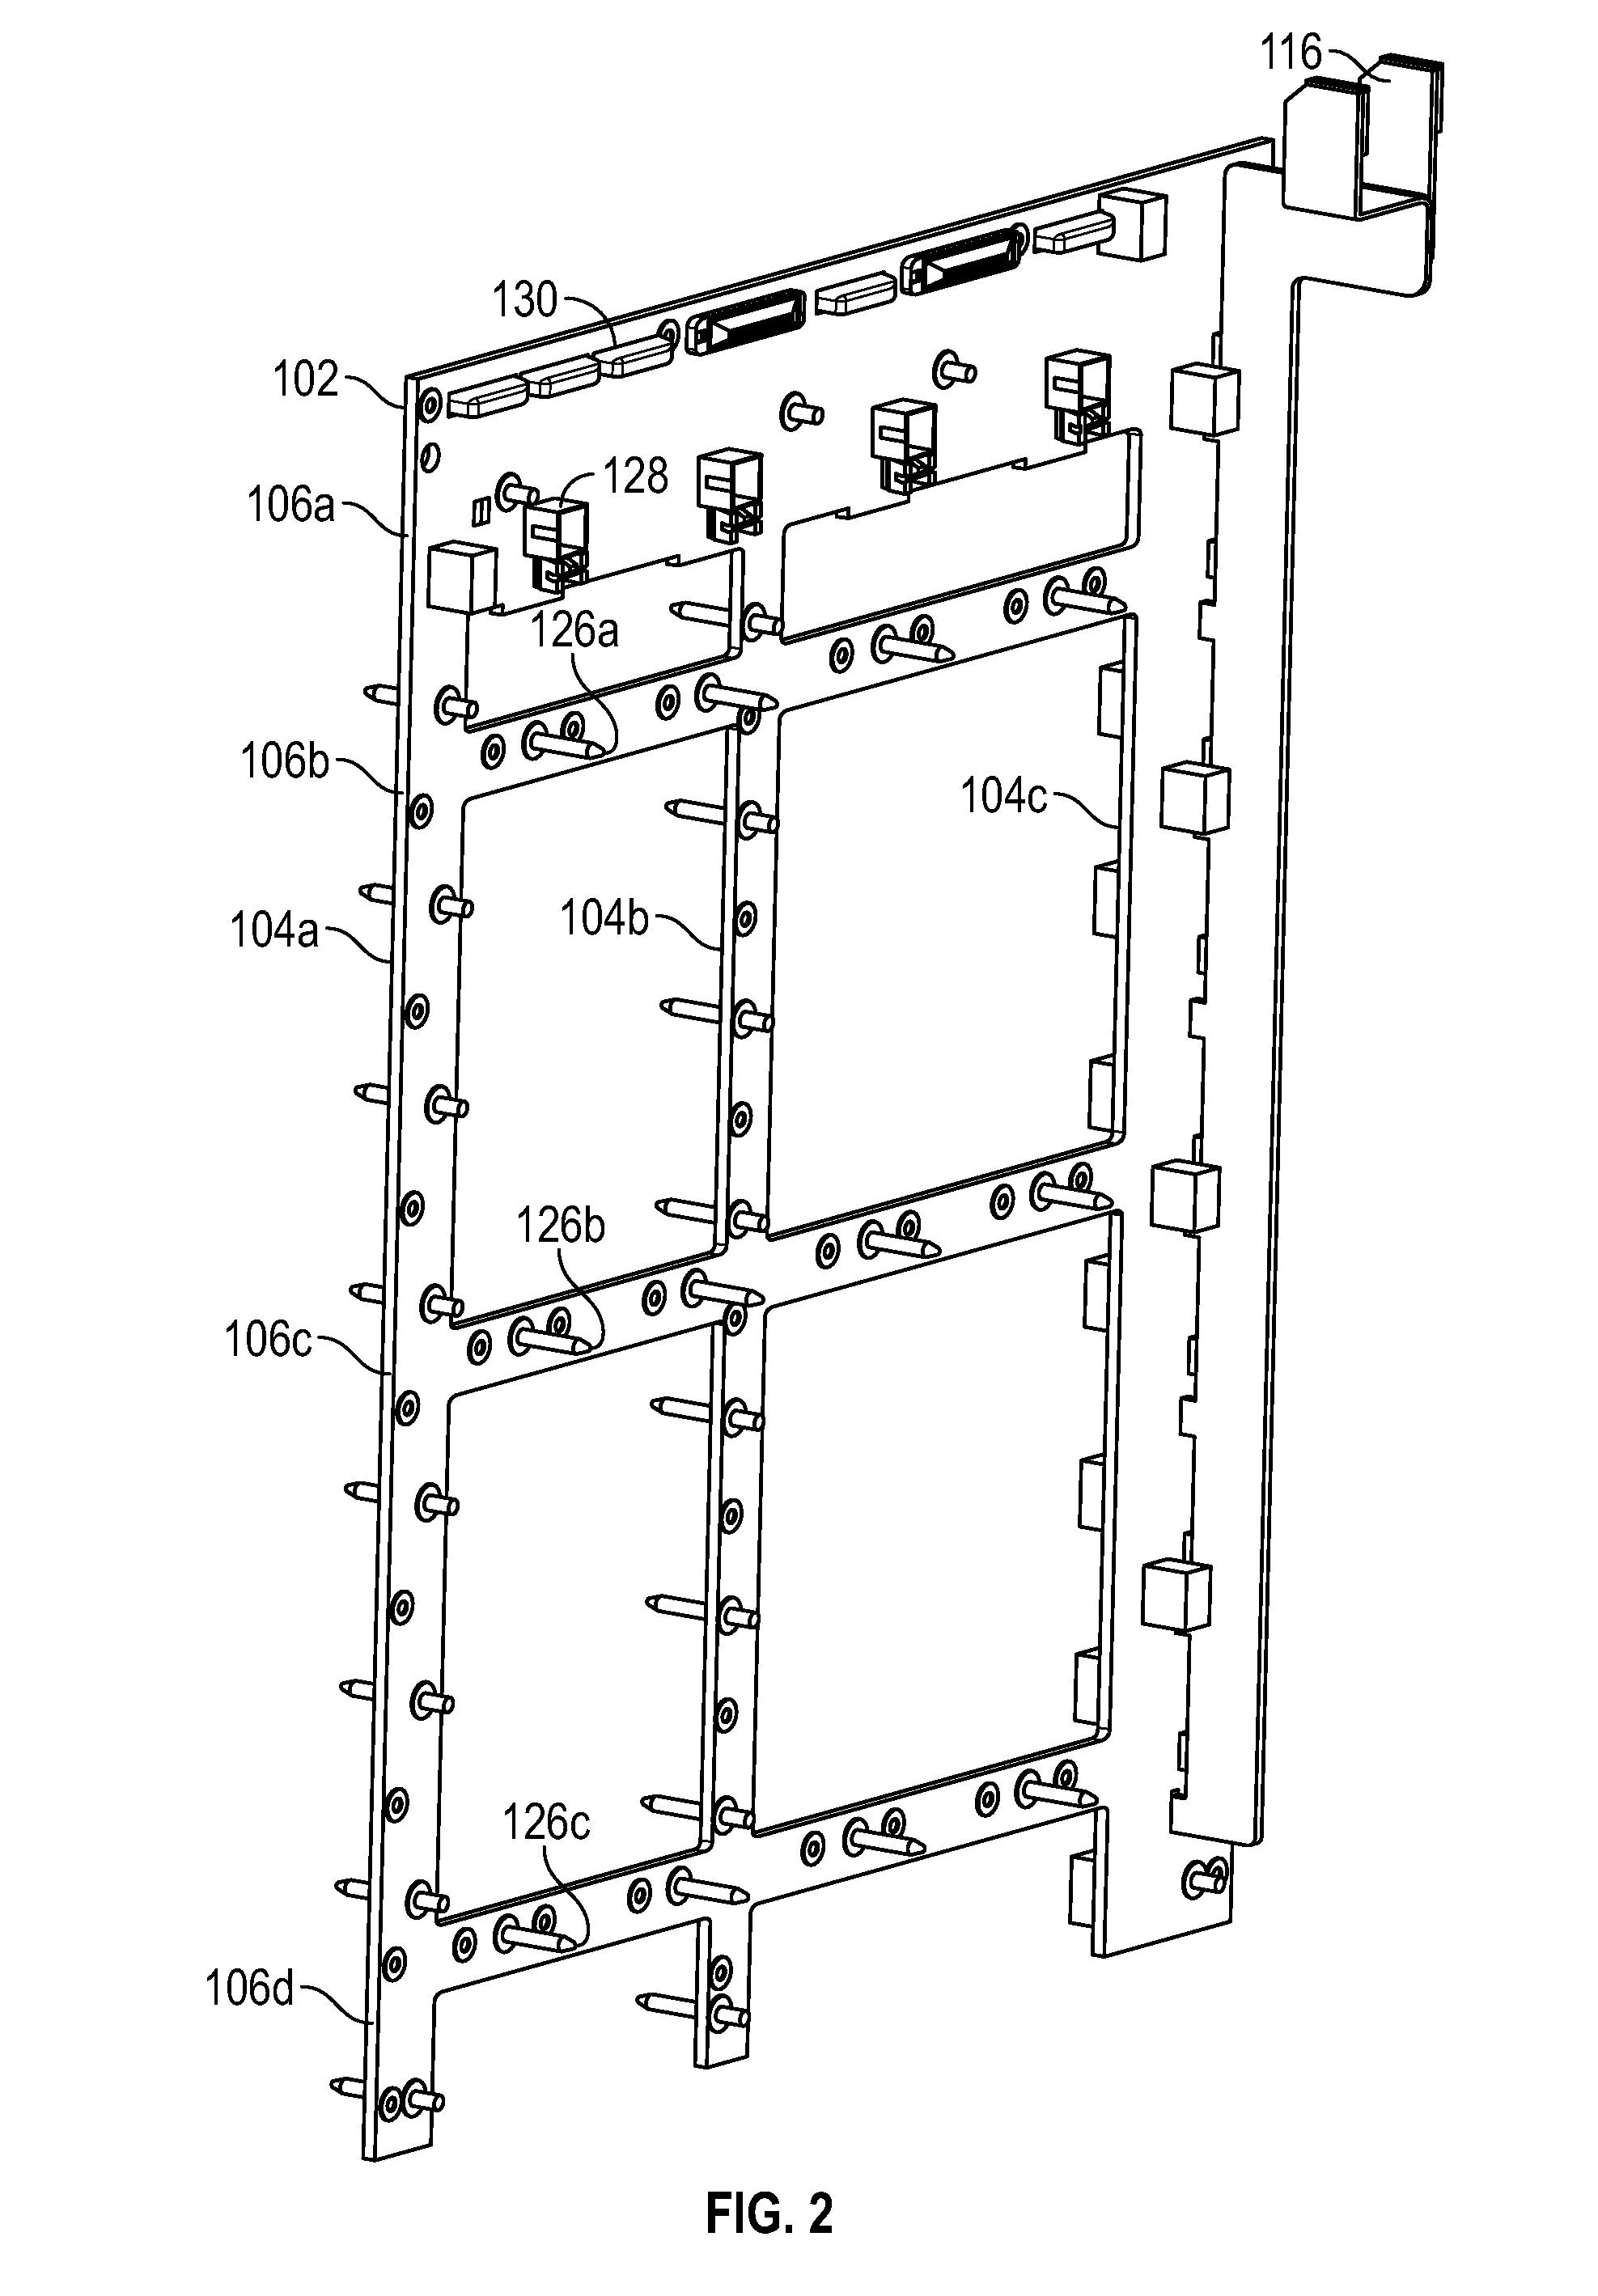 Midplane for orthogonal direct connection